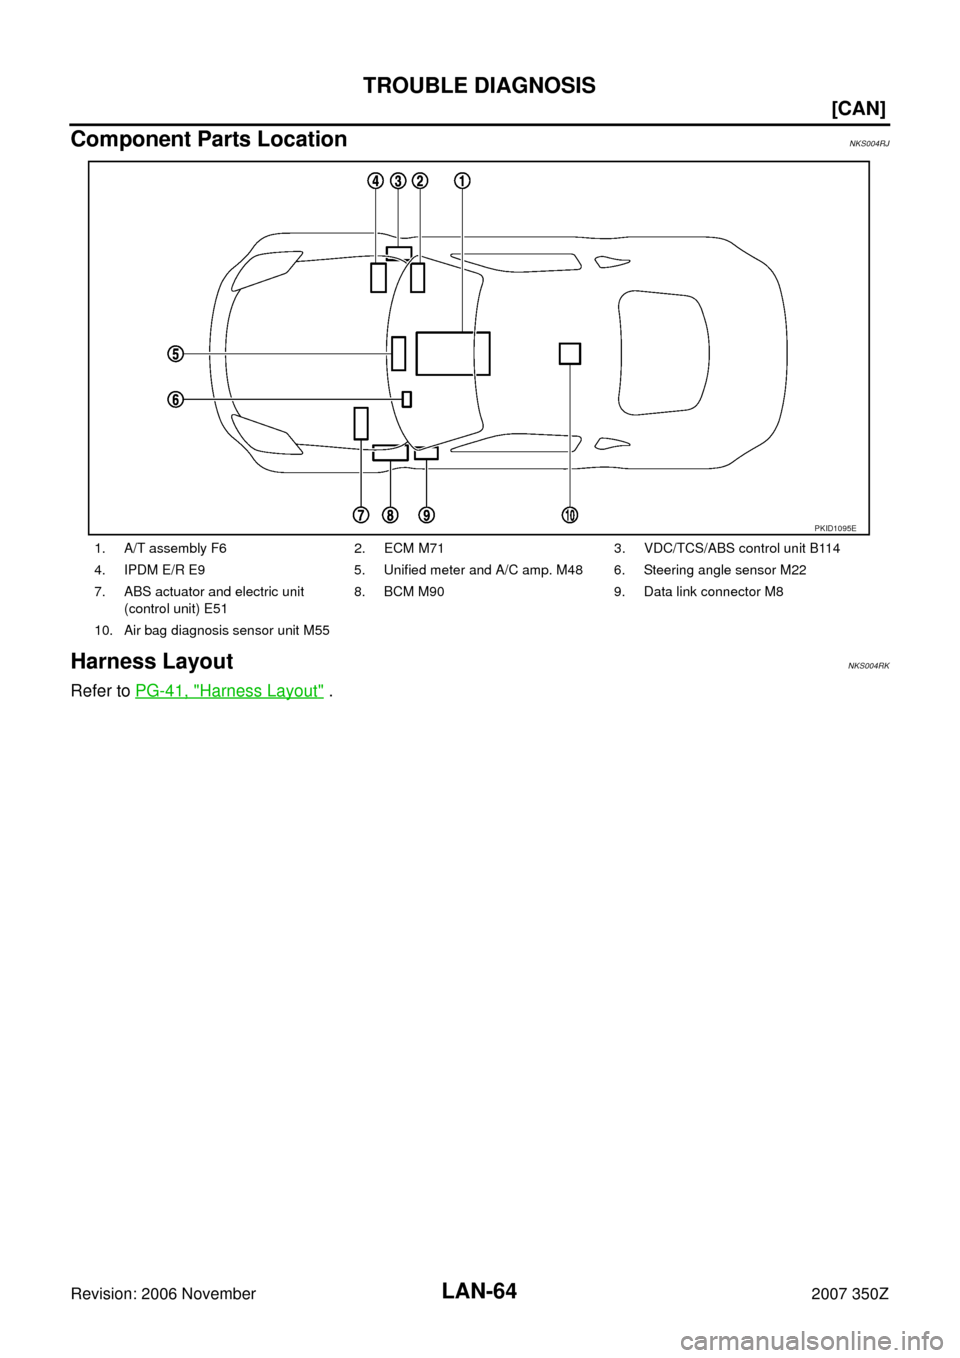 NISSAN 350Z 2007 Z33 LAN System Repair Manual LAN-64
[CAN]
TROUBLE DIAGNOSIS
Revision: 2006 November2007 350Z
Component Parts LocationNKS004RJ
Harness LayoutNKS004RK
Refer to PG-41, "Harness Layout" .
1. A/T assembly F6 2. ECM M71 3. VDC/TCS/ABS 